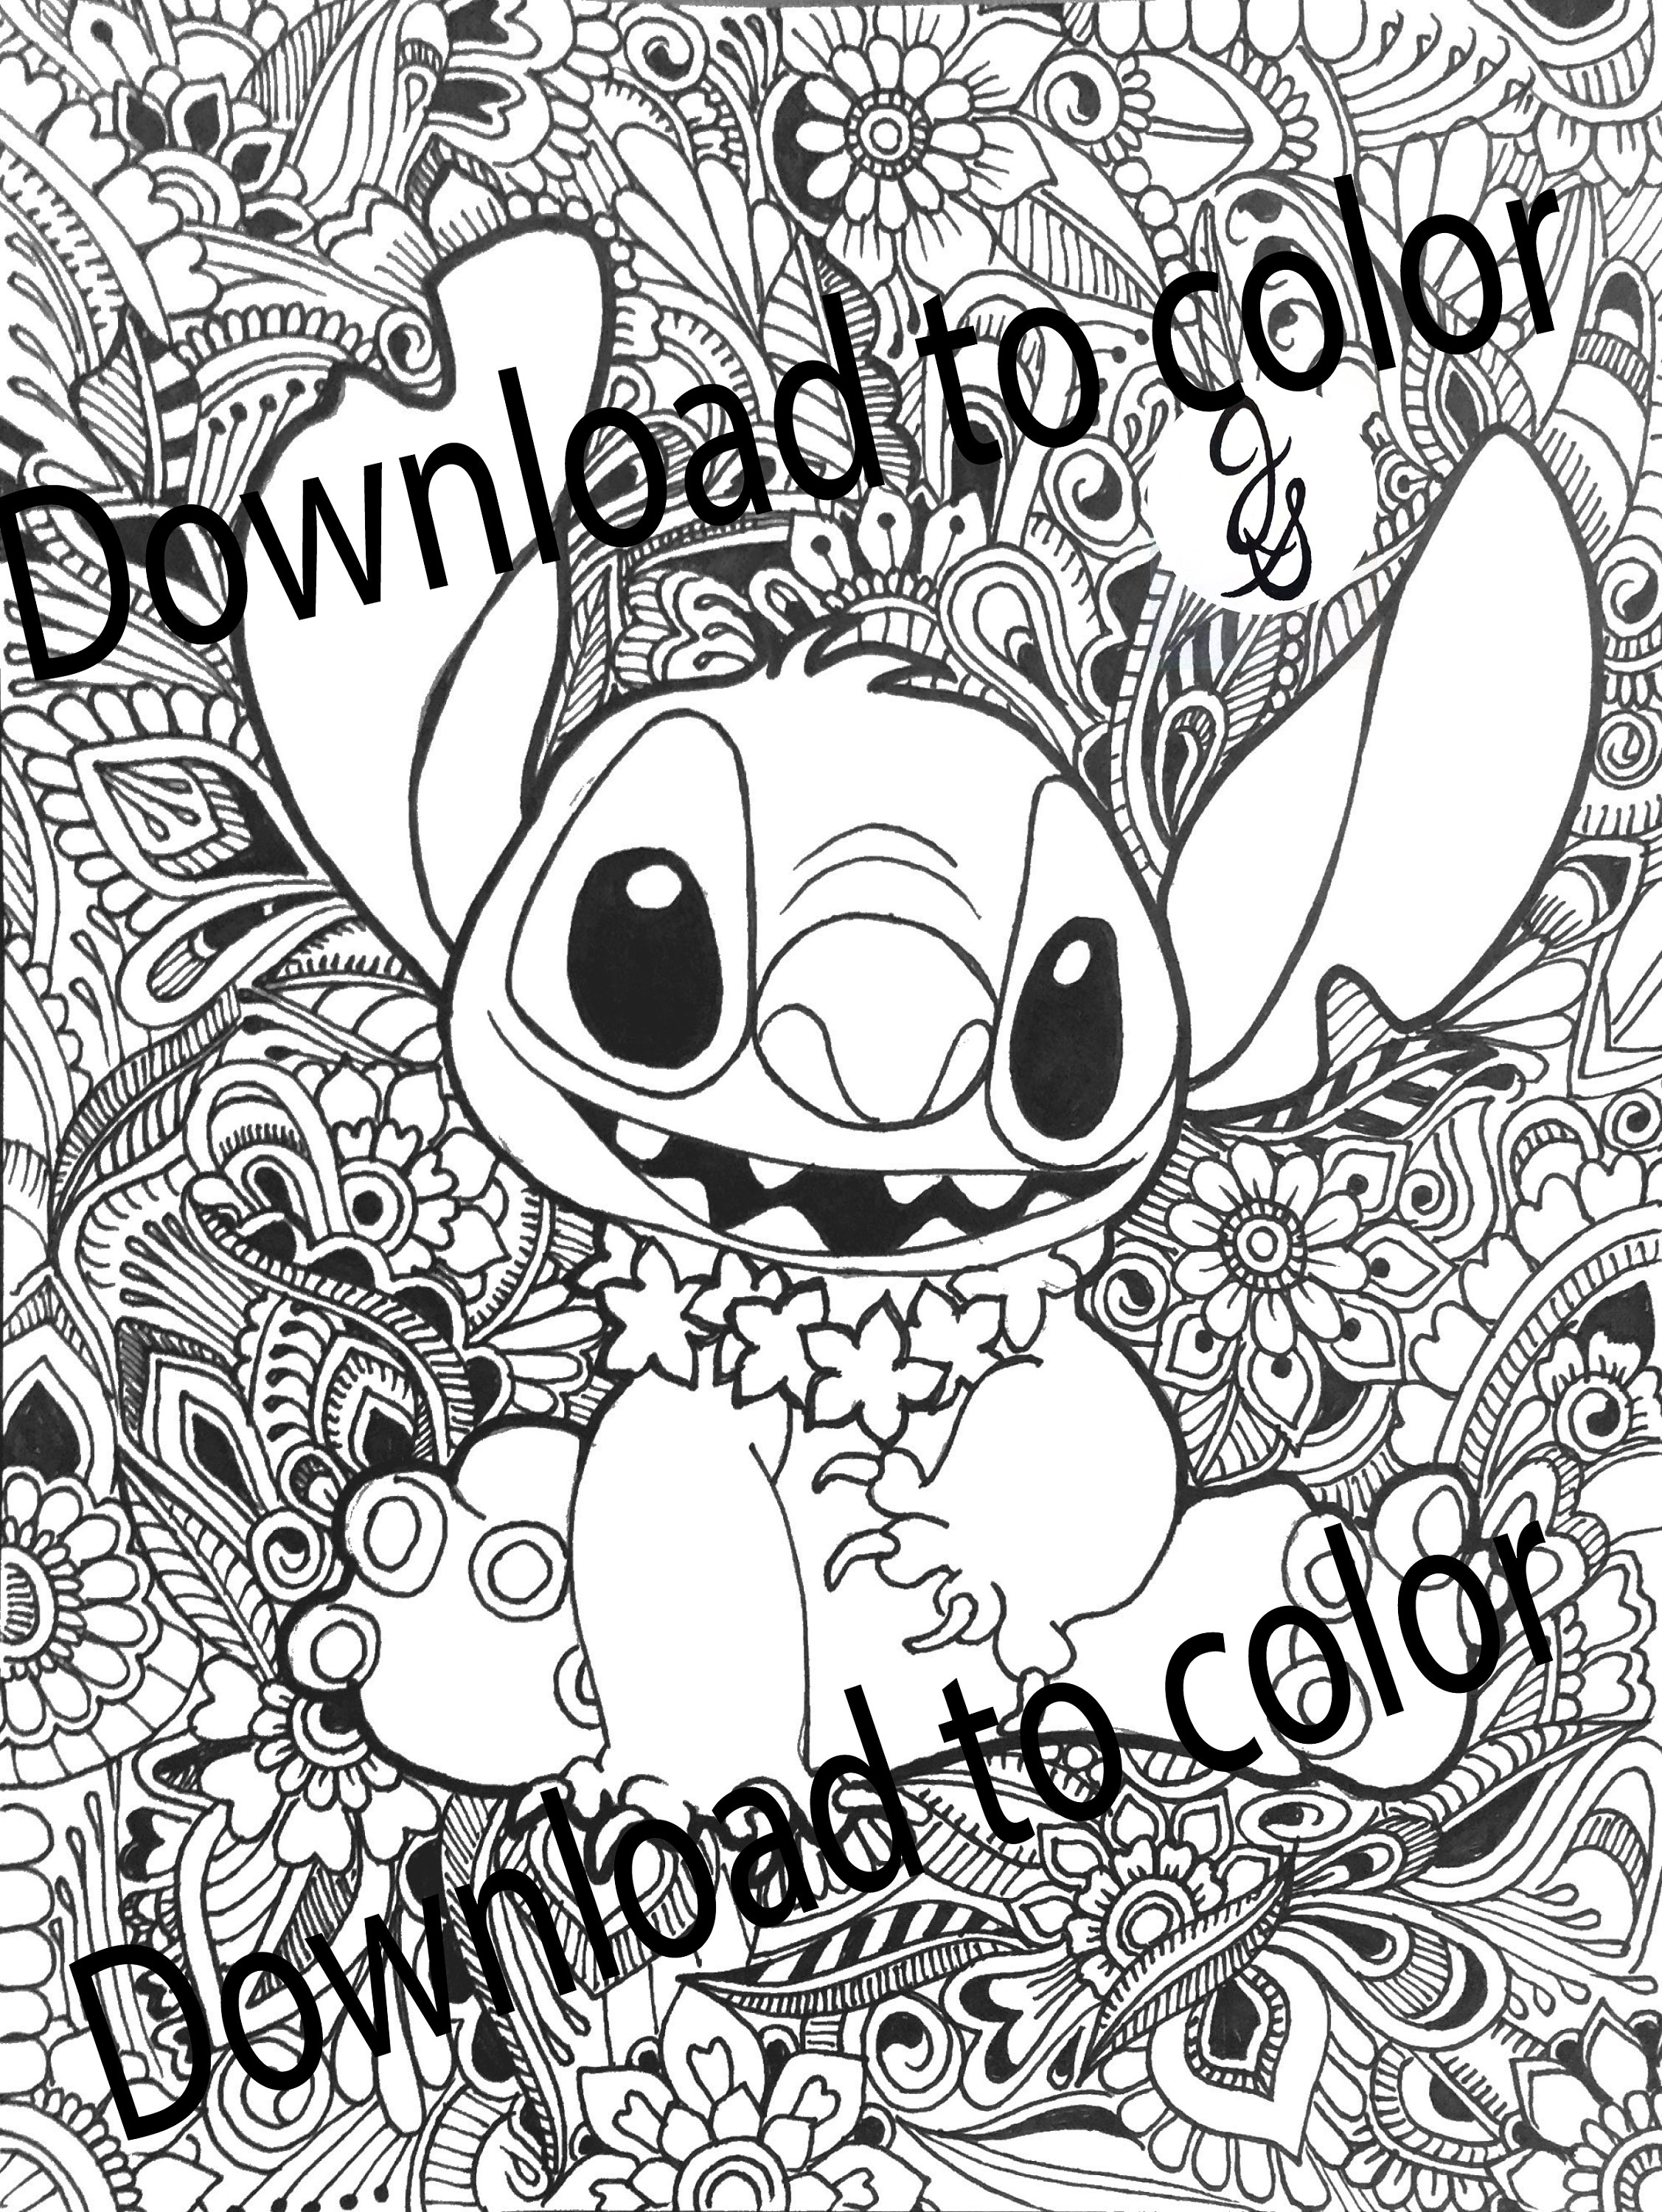 Vacation stitch coloring page